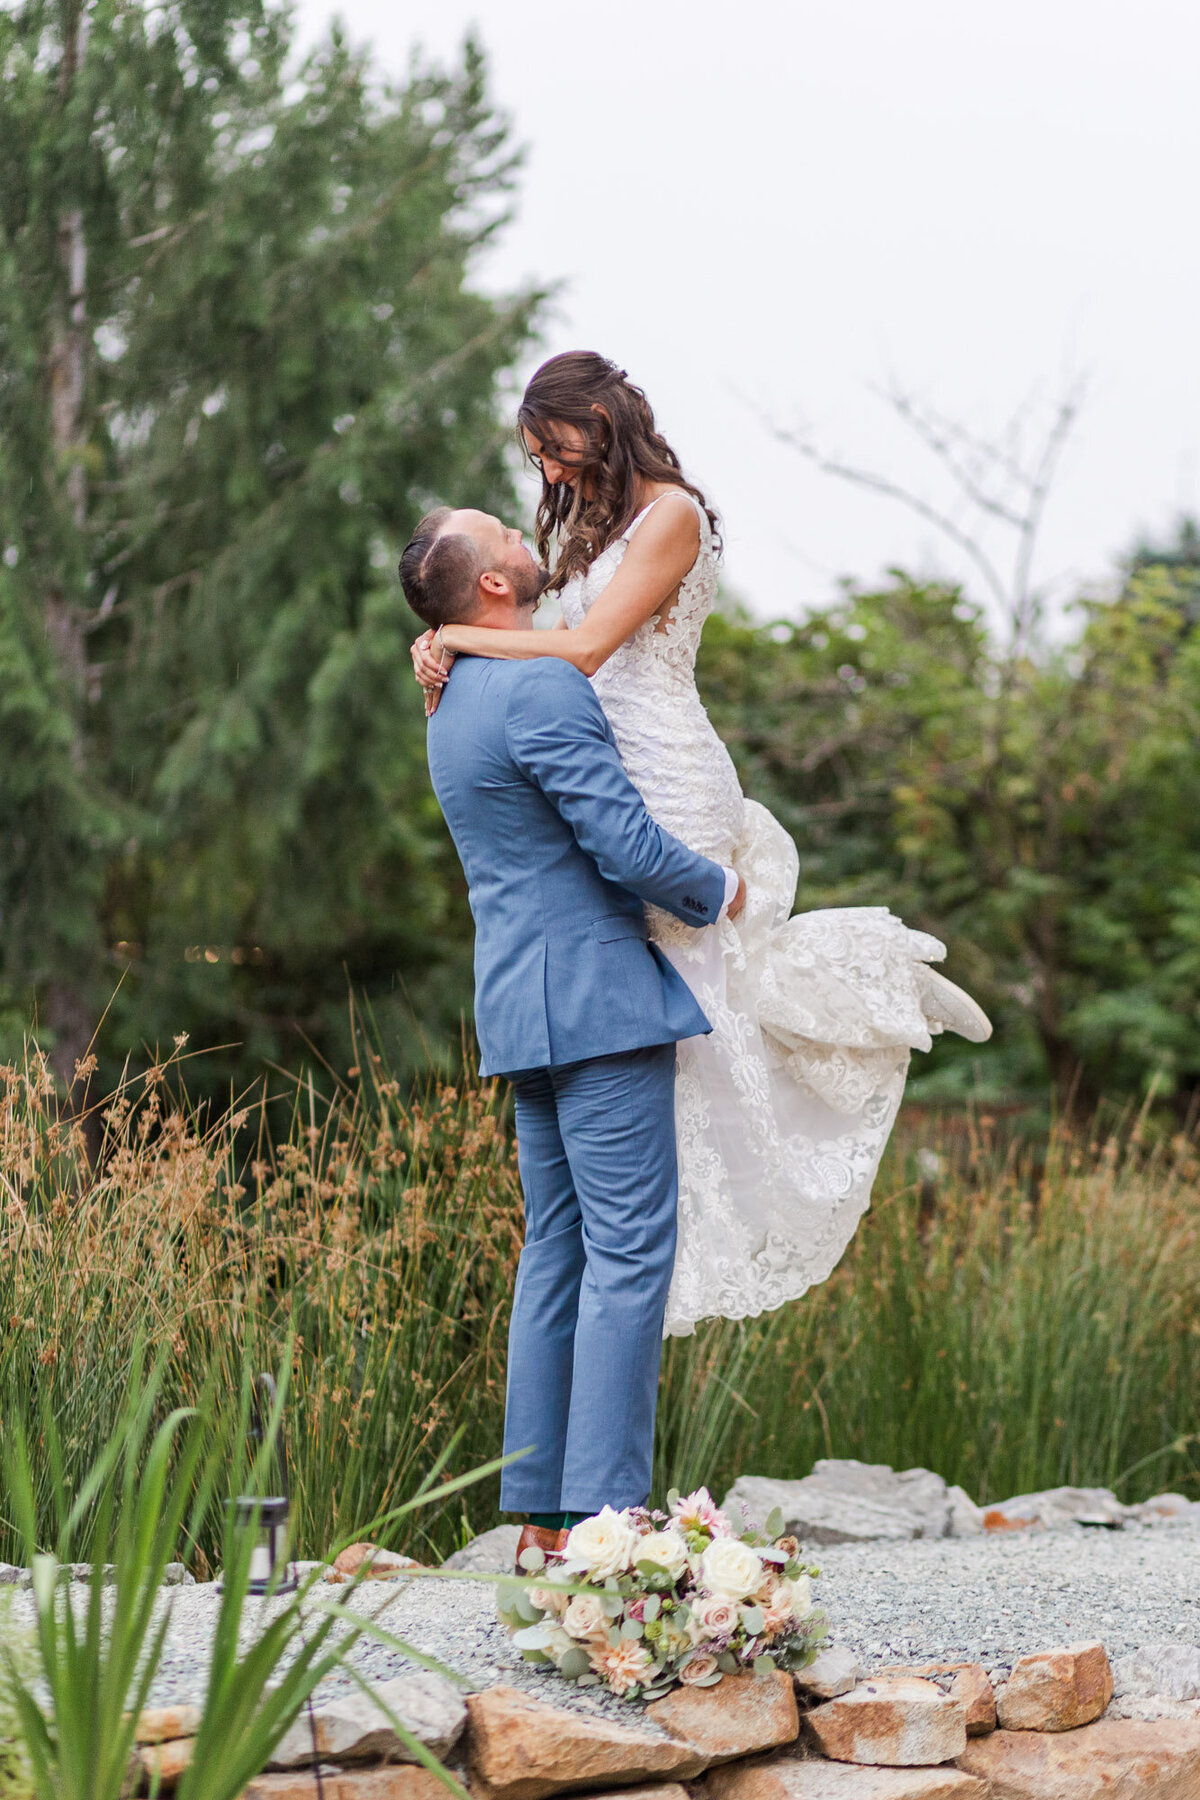 Groom-picks-up-bride-and-has-fun-at-stunning-forest-outdoor-venue-Gray-Bridge-Sultan-near-Snohomish-WA-photo-by-Joanna-Monger-Photography